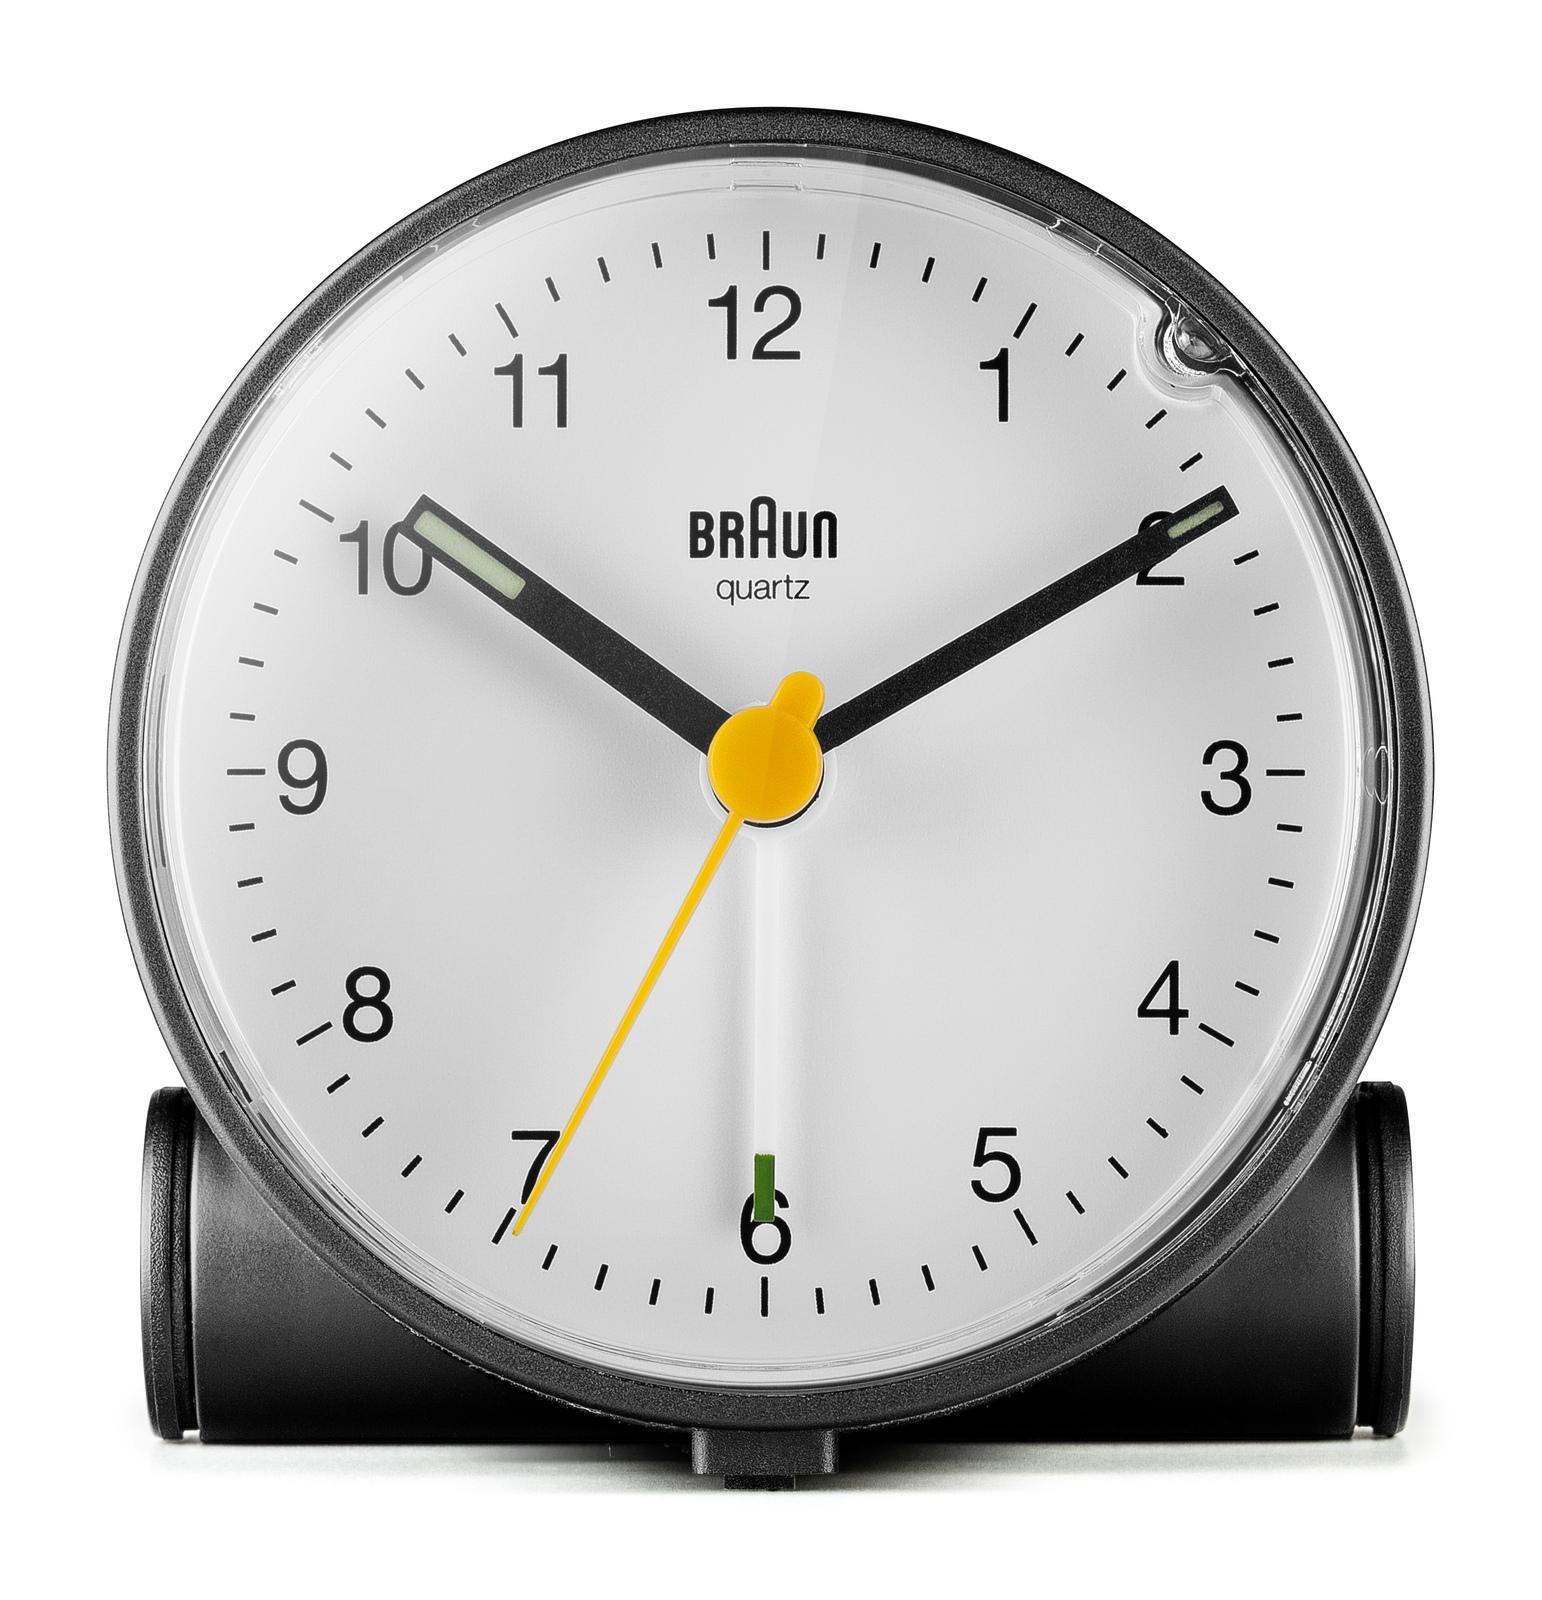 7cm Black Analogue Alarm Clock With White Dial By BRAUN